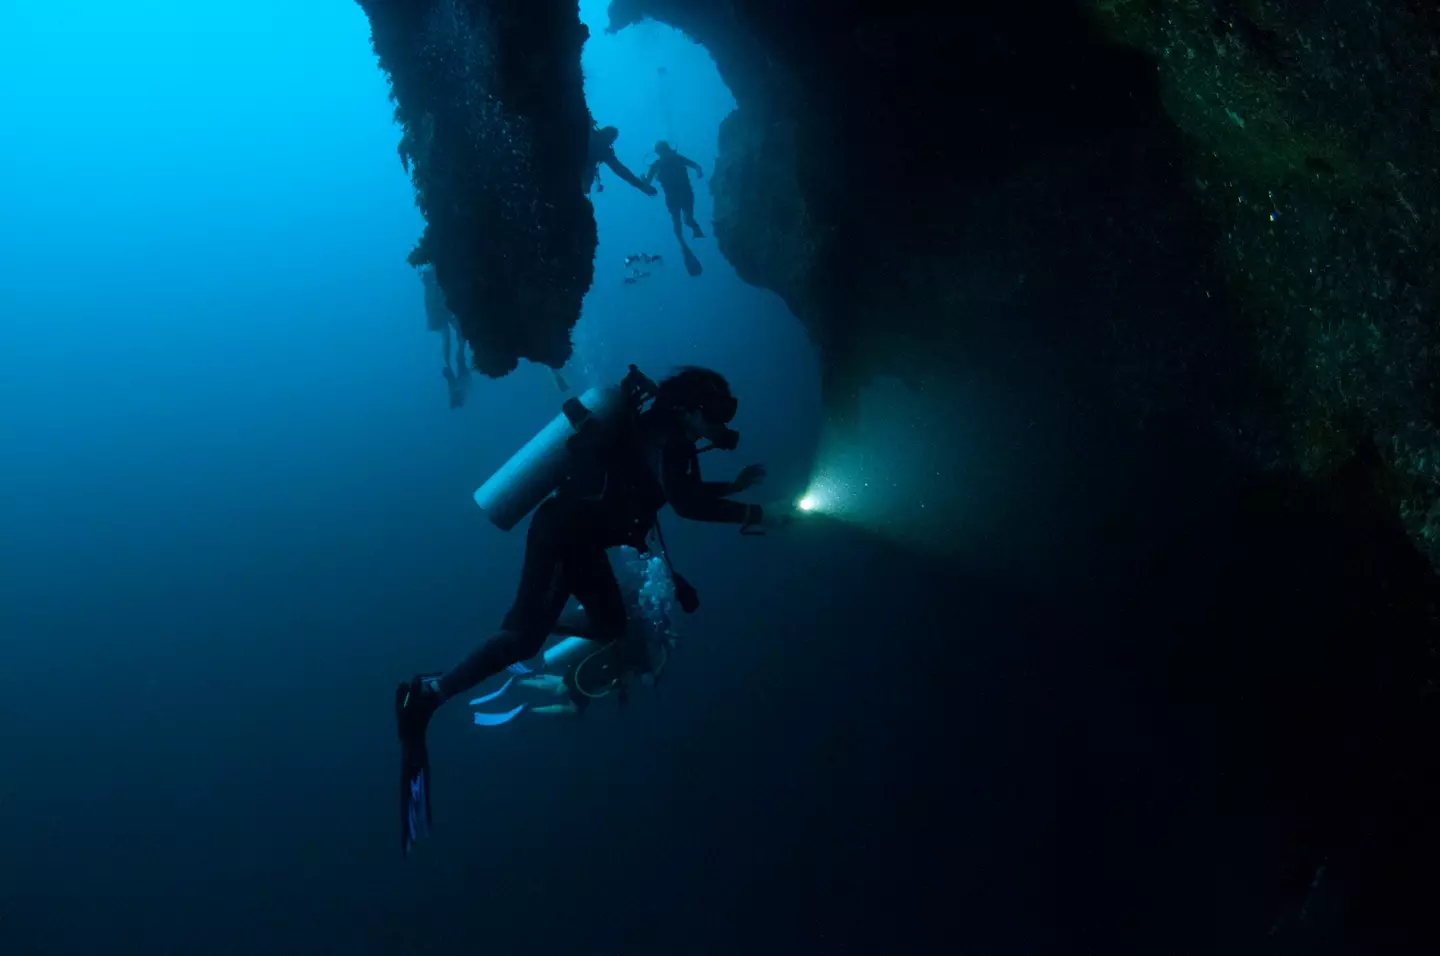 Divers exploring the Great Blue Hole have made some amazing discoveries, and also some disturbing ones. (Andre Seale/VW PICS/Universal Images Group via Getty Images)